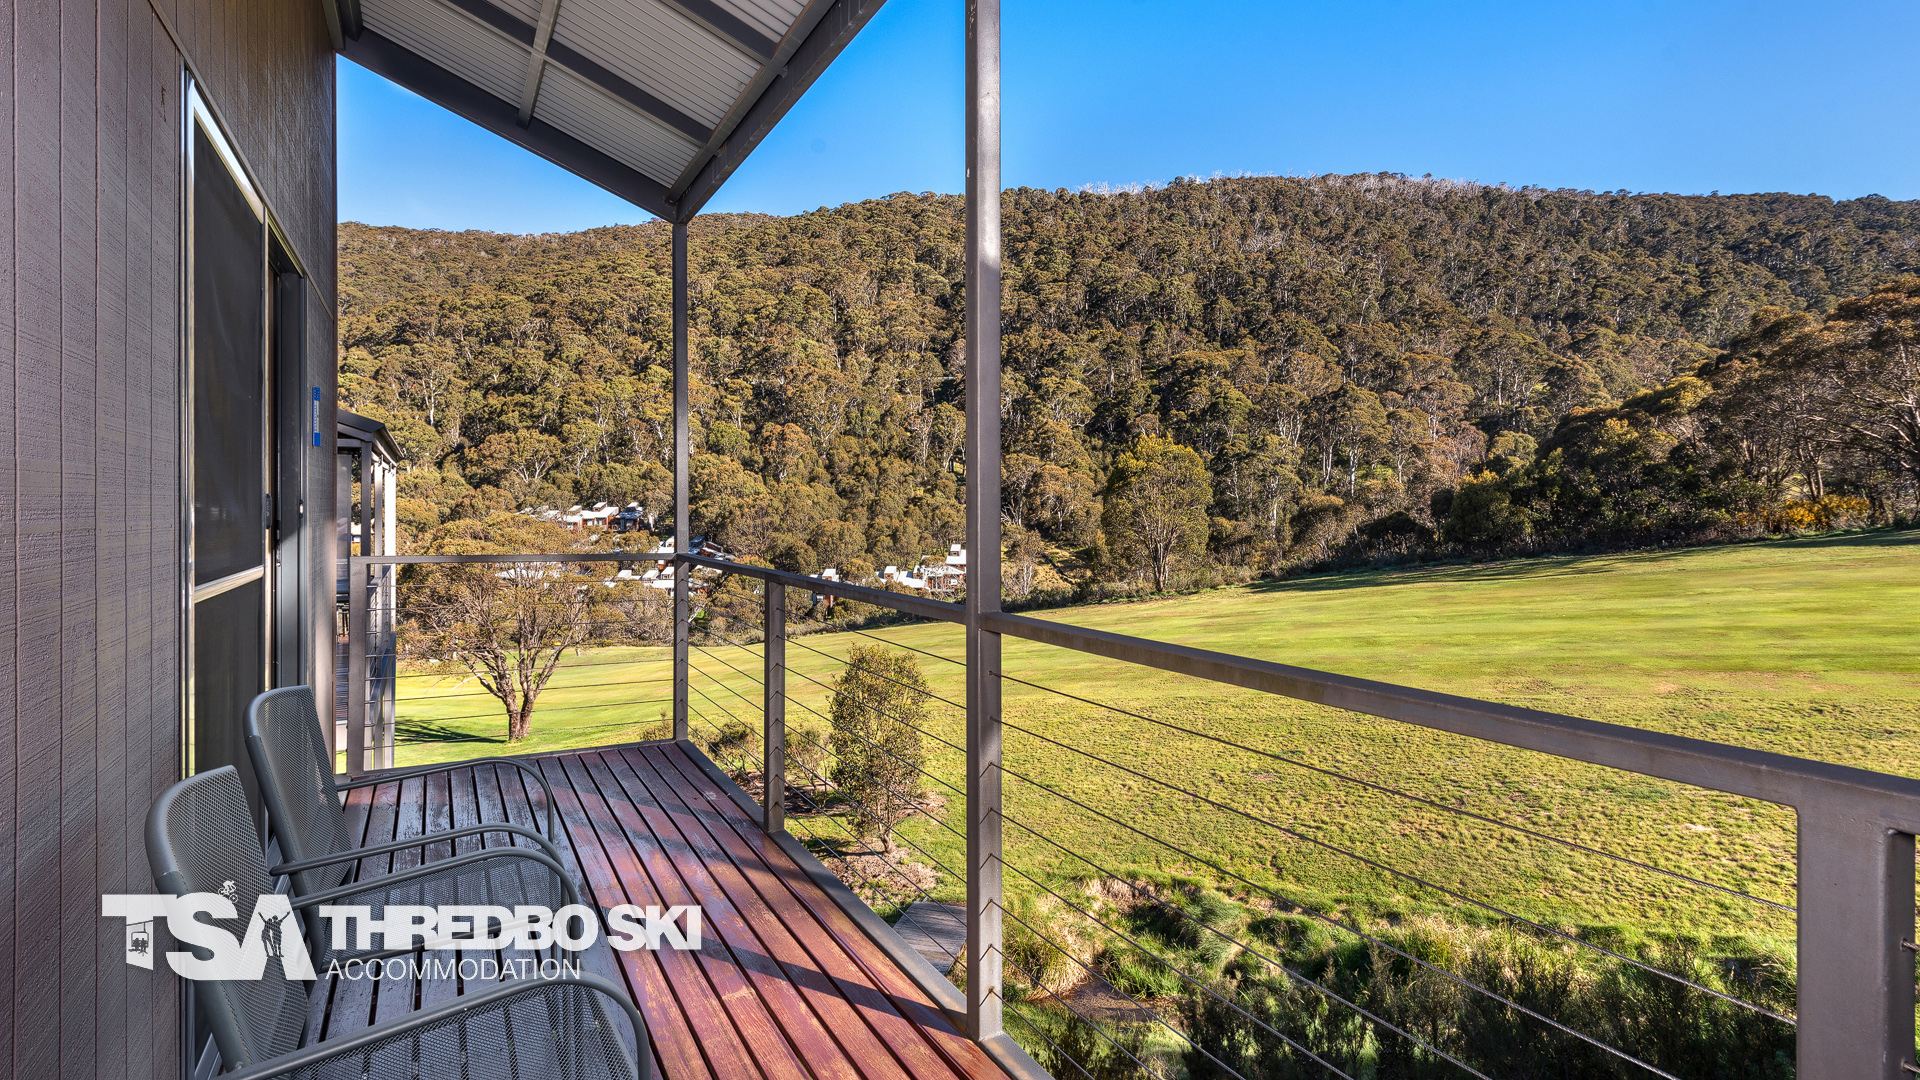 Snowbound 4 – One and Loft Chalet overlooking Thredbo Golf course <br>EOI over $1.6M